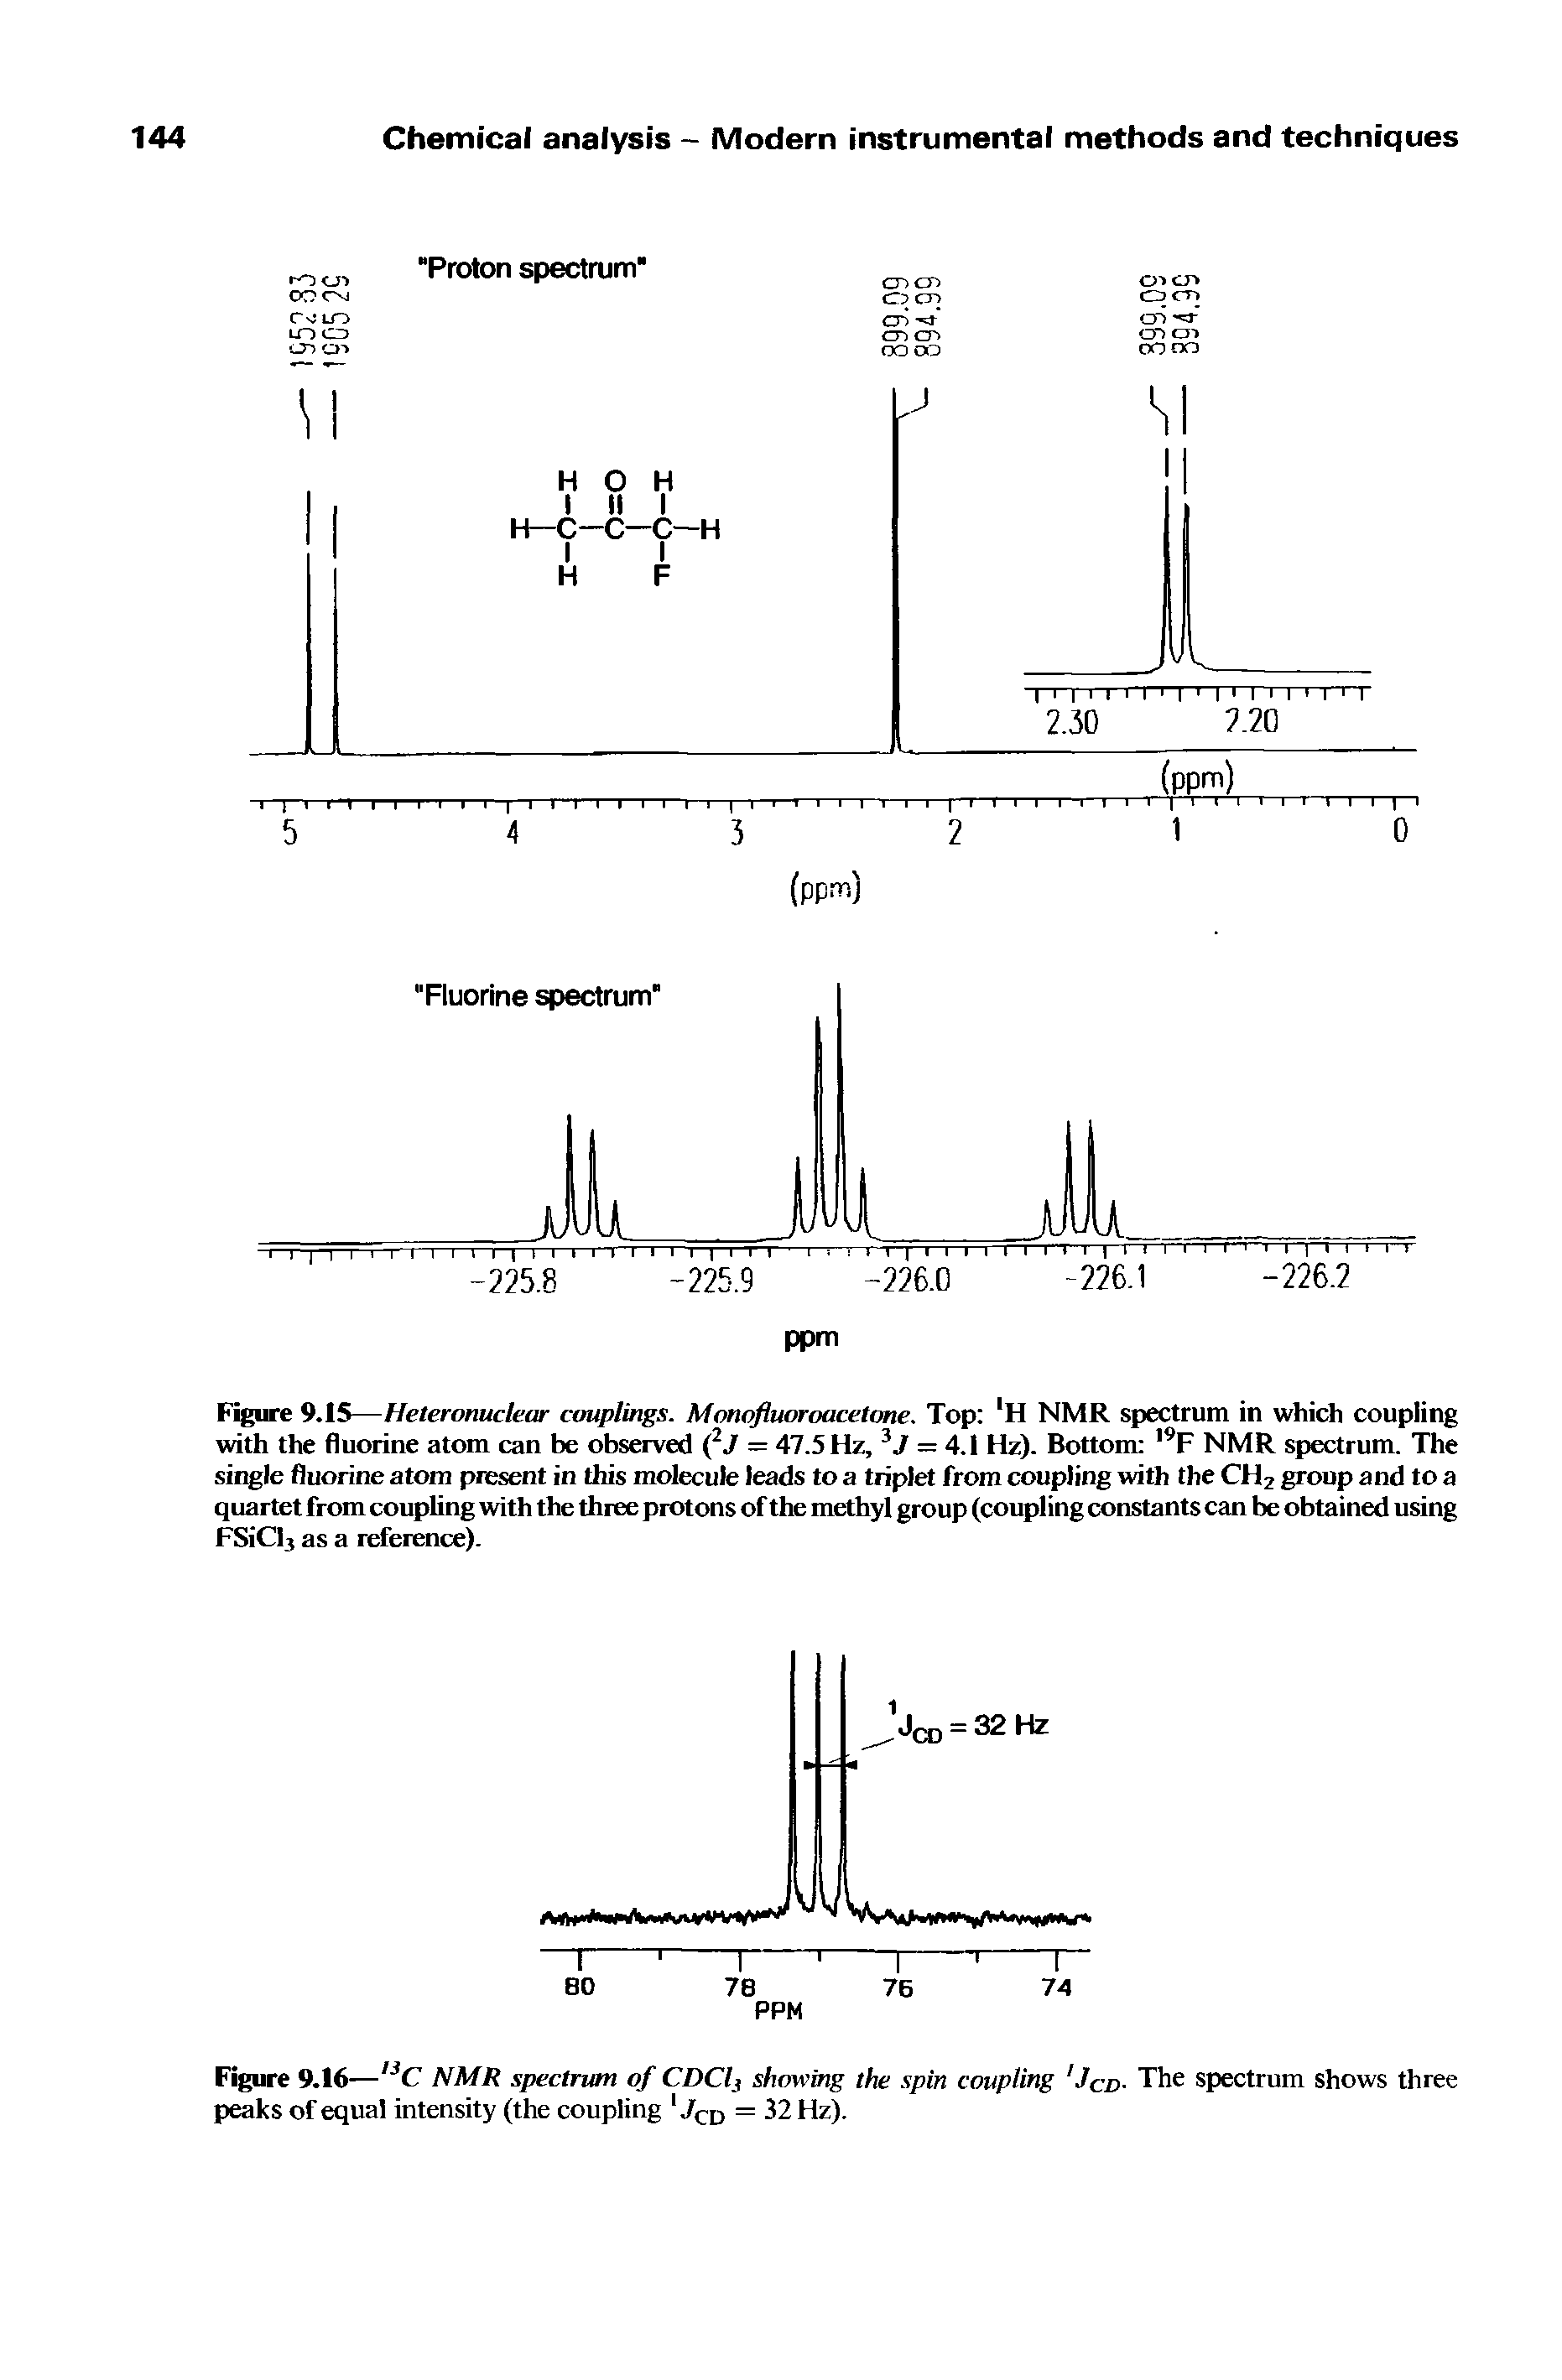 Figure 9.15—Heteronuclear couplings. Monofluoroacetone. Top H NMR spectrum in which coupling with the fluorine atom can be observed (2J = 47.5 Hz, 3J = 4.1 Hz). Bottom l9F NMR spectrum. The single fluorine atom present in this molecule leads to a triplet from coupling with the CH2 group and to a quartet from coupling with the three protons of the methyl group (coupling constants can be obtained using FSiCI, as a reference).